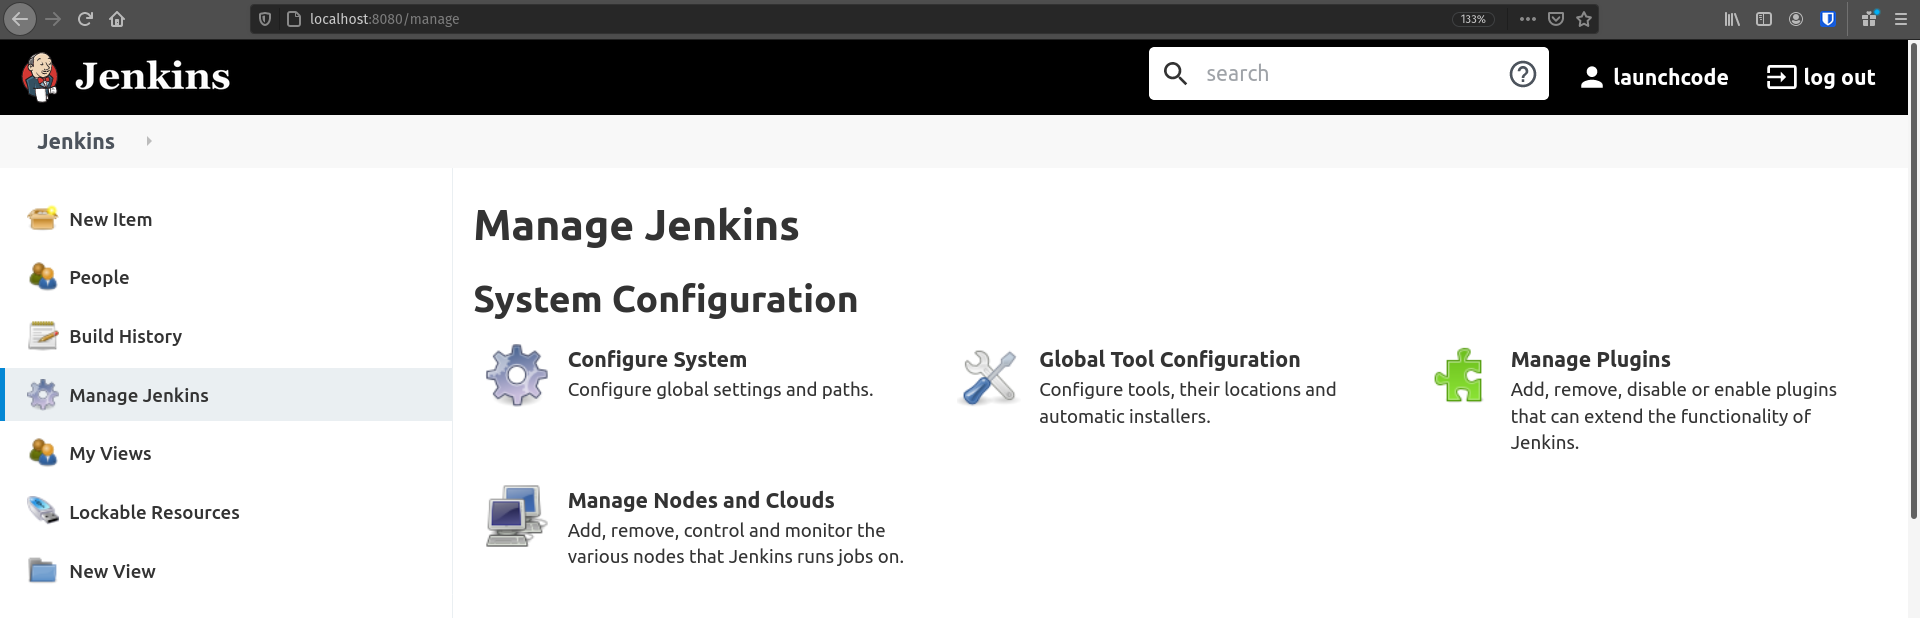 ../../_images/manage-jenkins.png